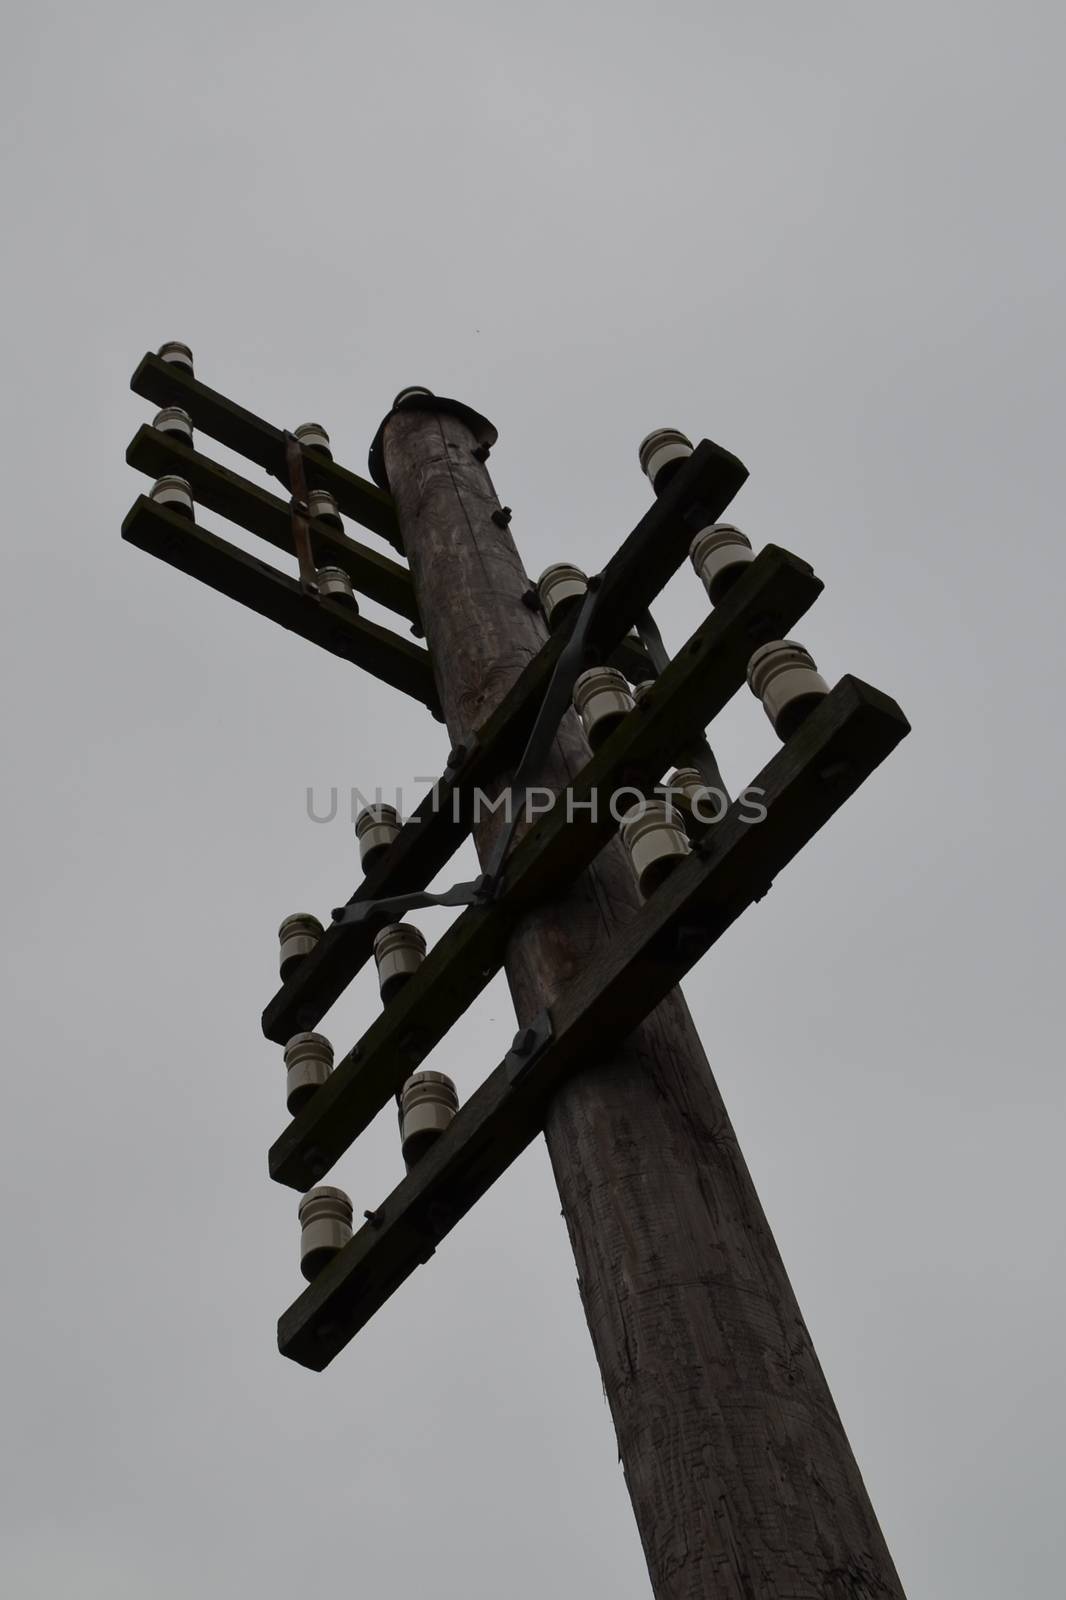 Wooden British electricity pole without wires connected.